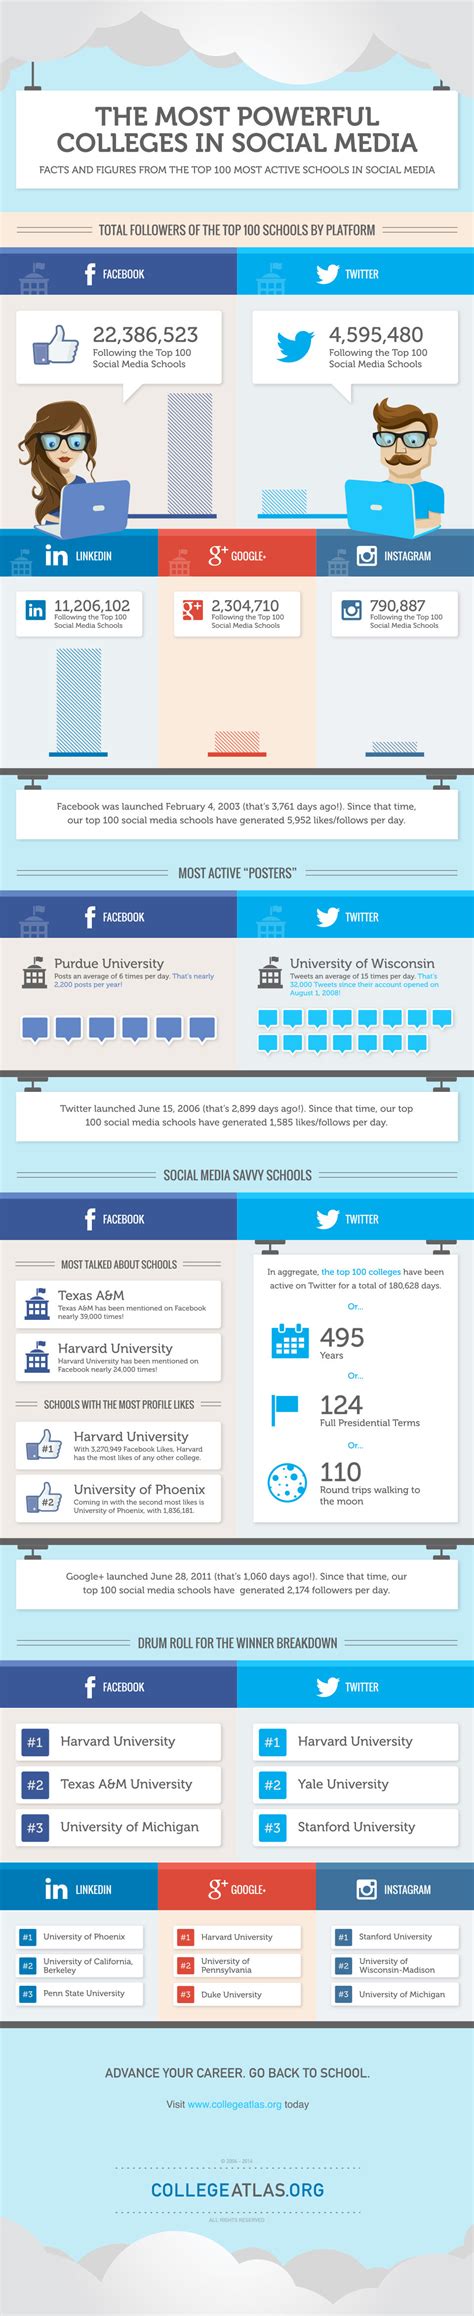 The Most Powerful Colleges In Social Media Infographic Visualistan